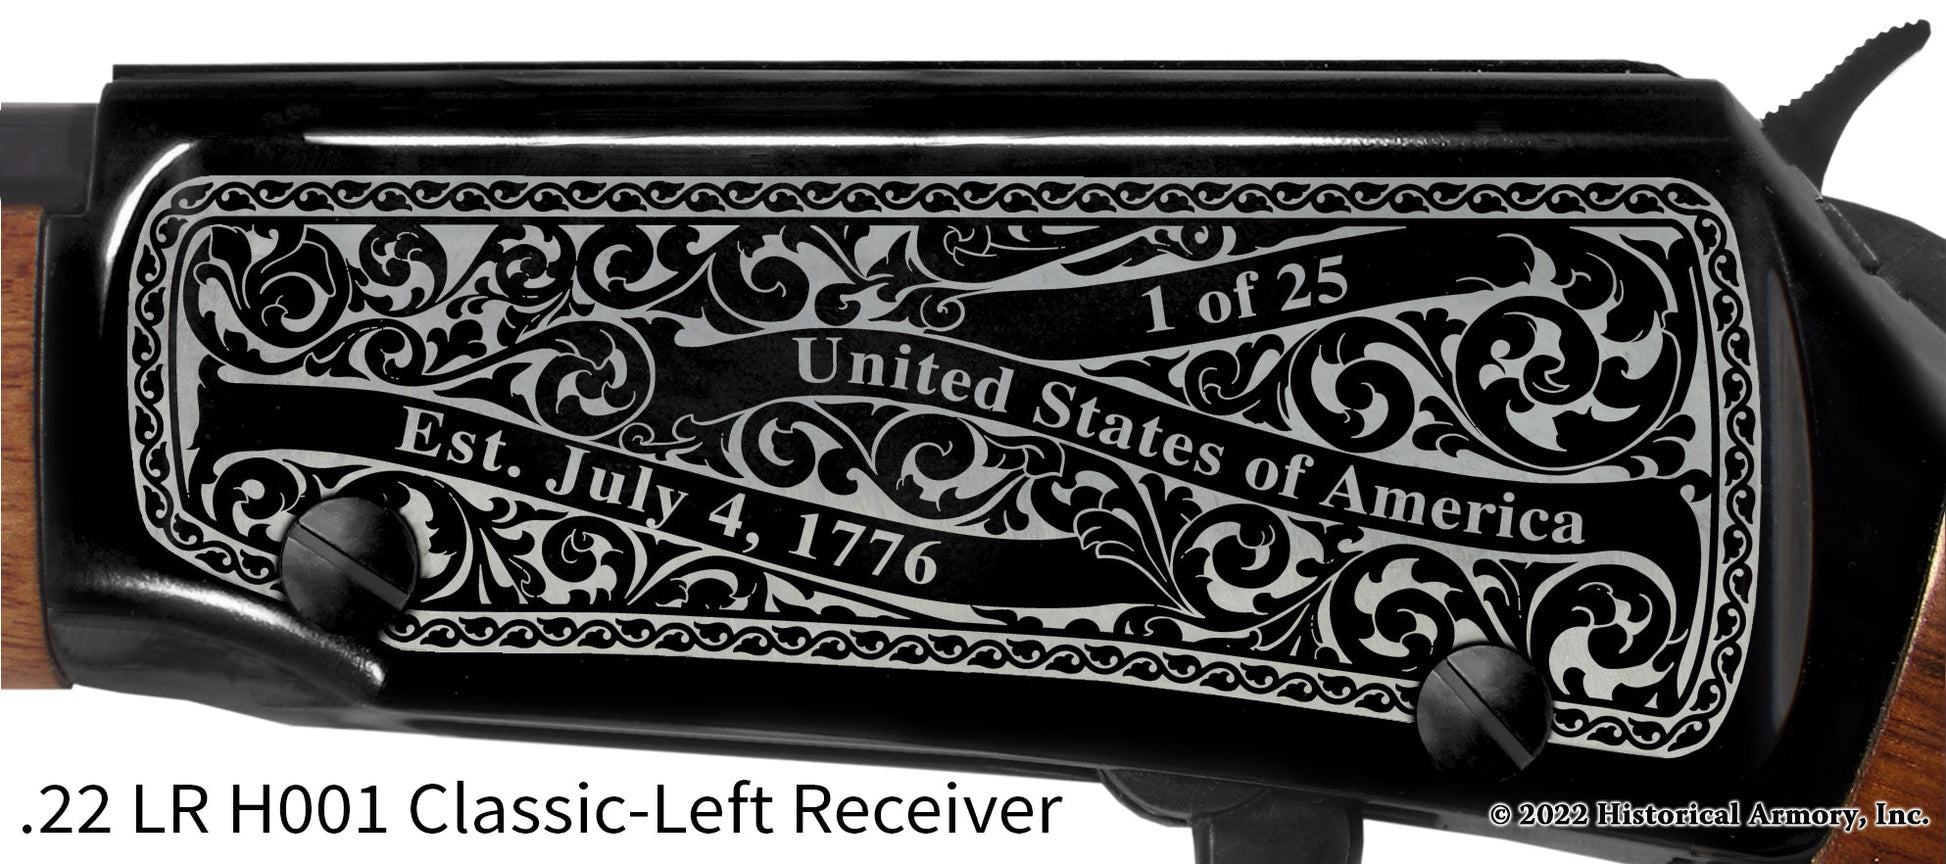 Ross County Ohio Engraved Henry H001 Rifle